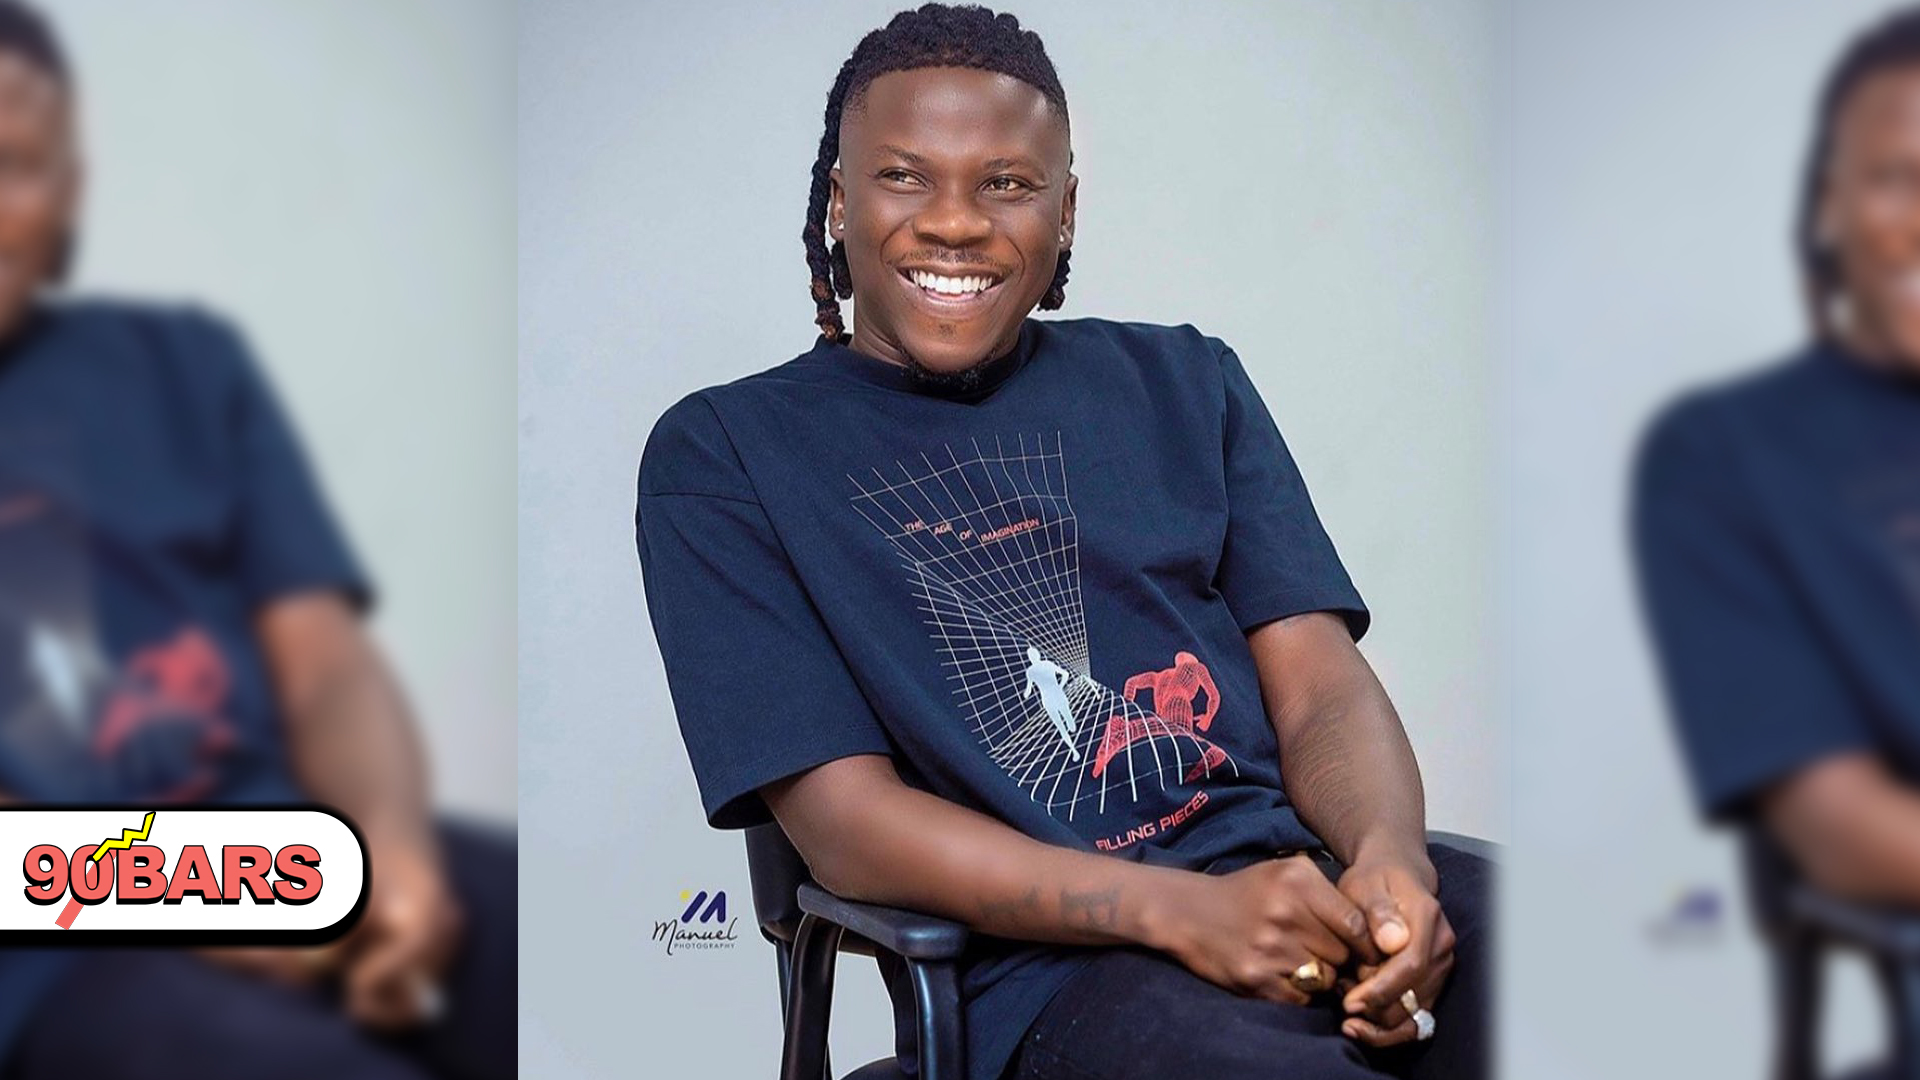 Stonebwoy Tells to Apple Music about working with Shaggy and Angelique Kidjo.